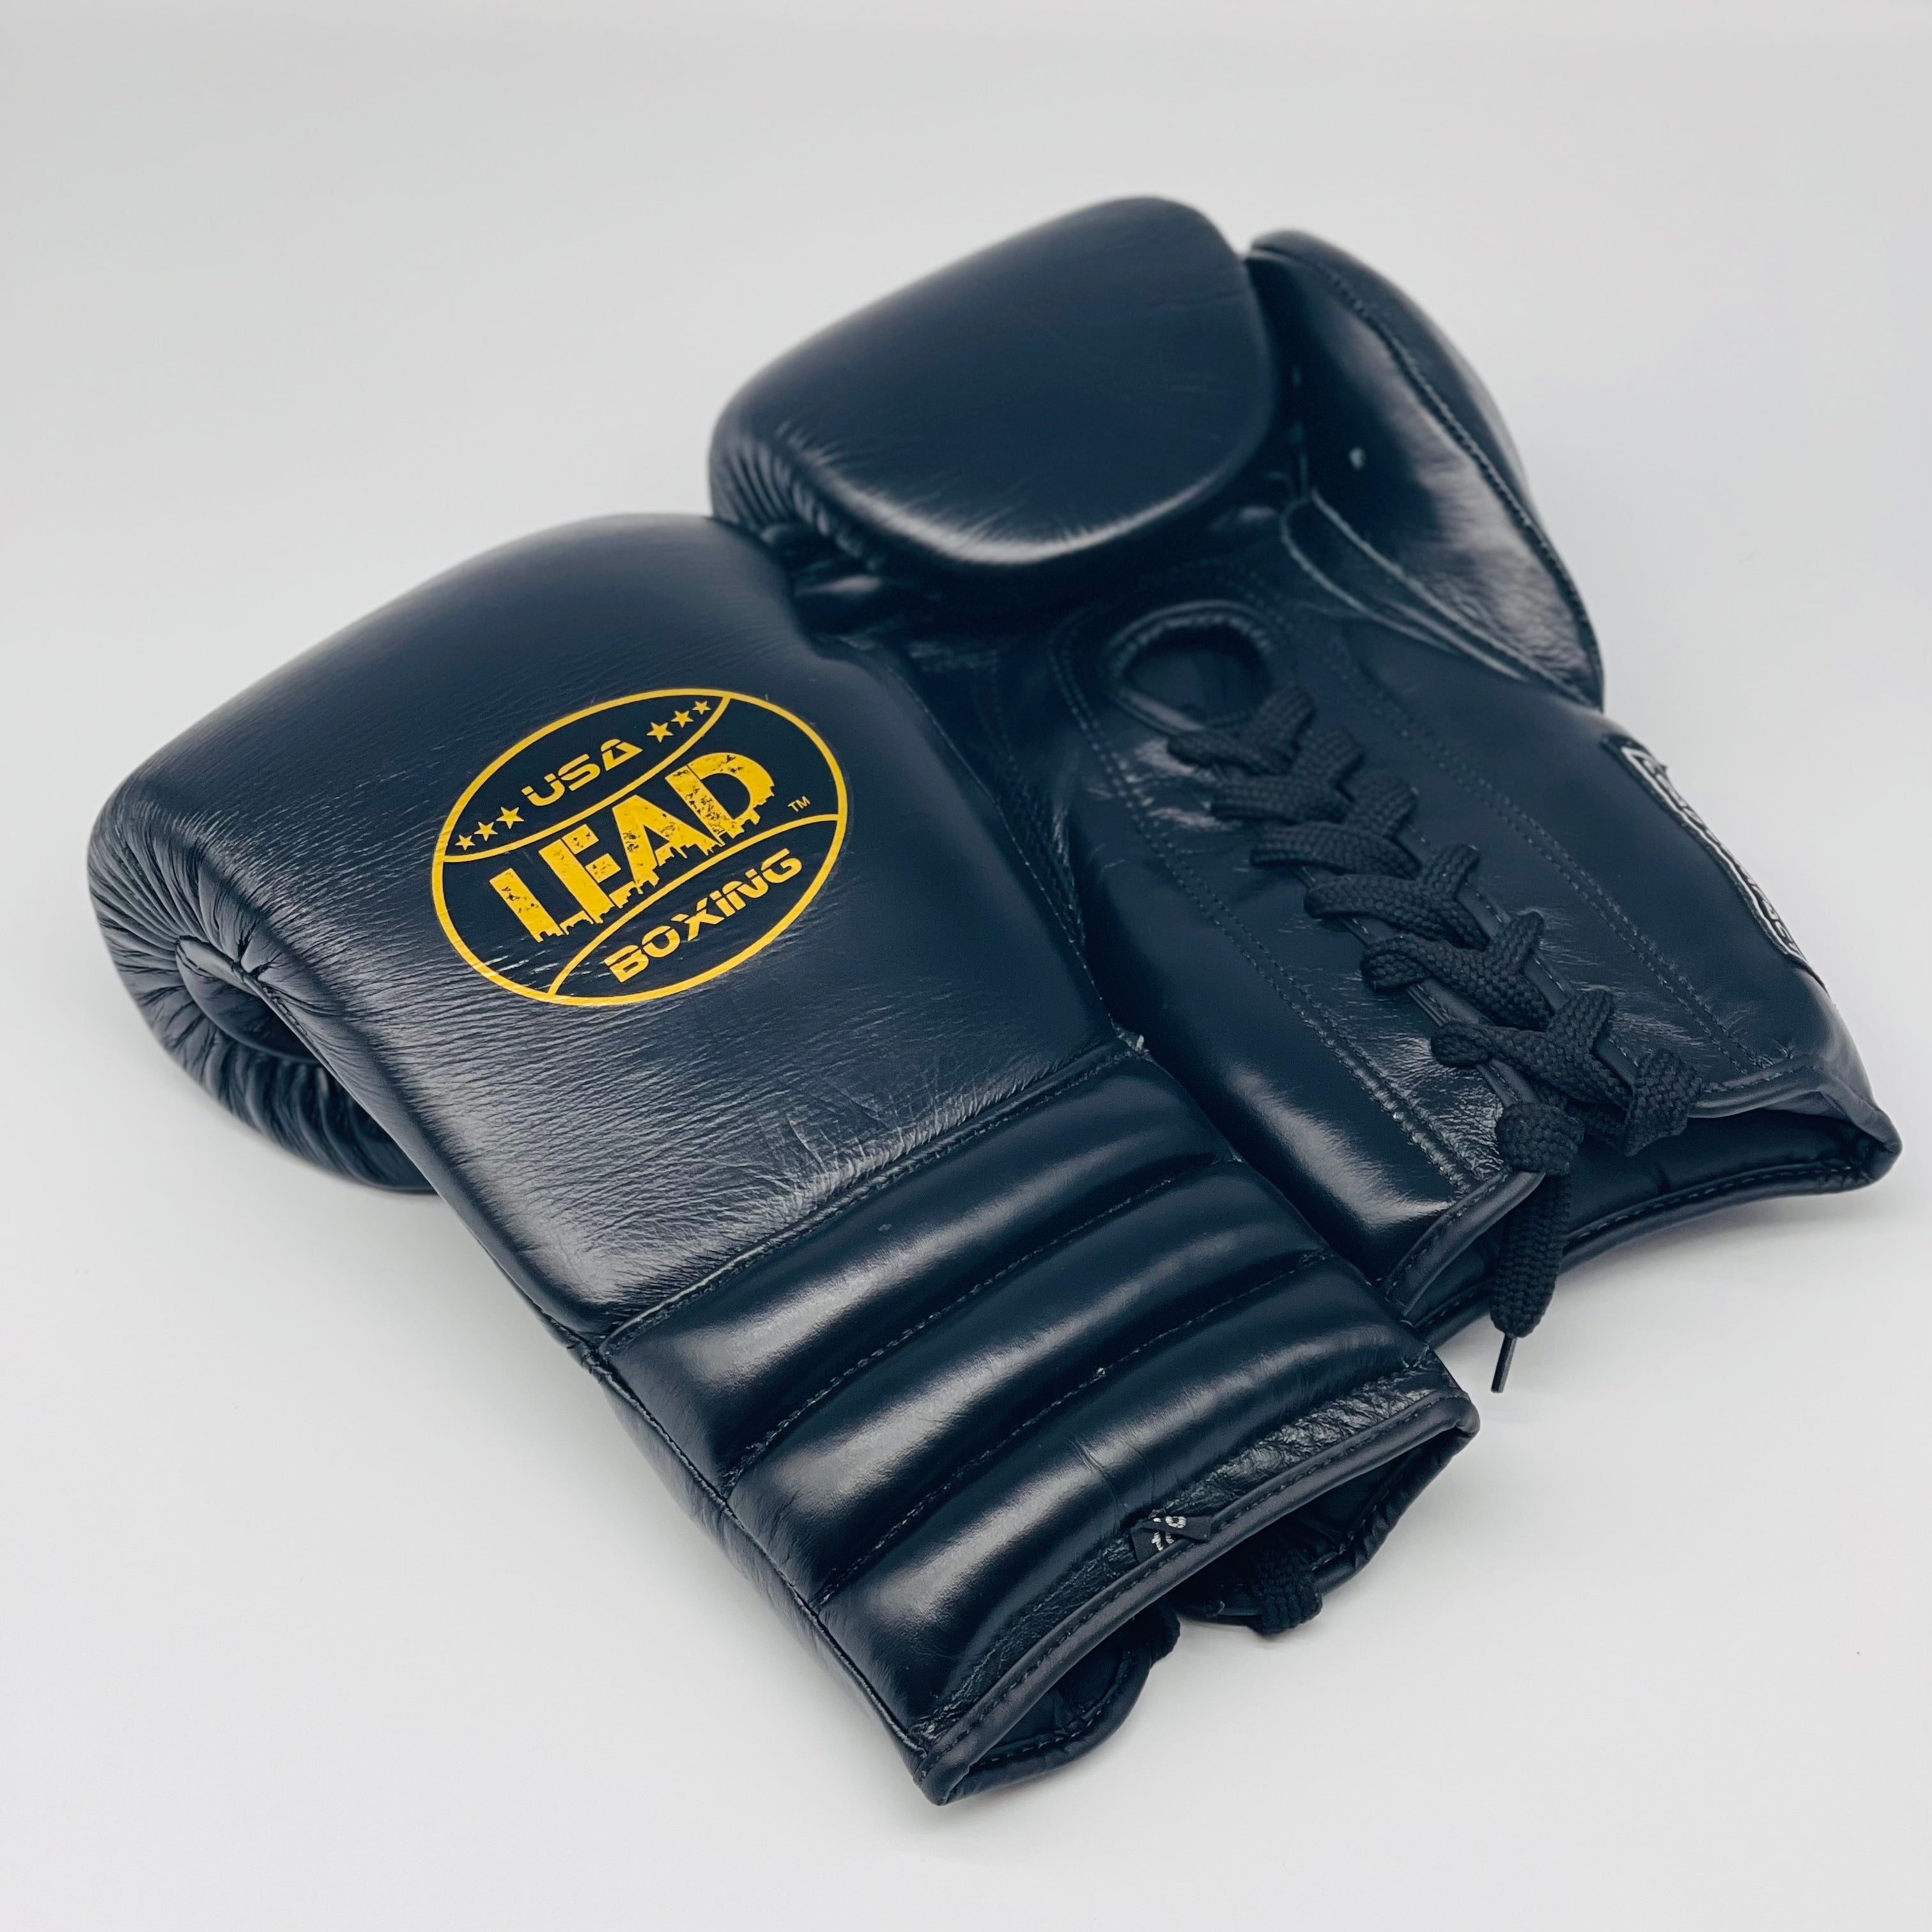 Lead Compact Sparring Gloves (Black-Gold Logo)